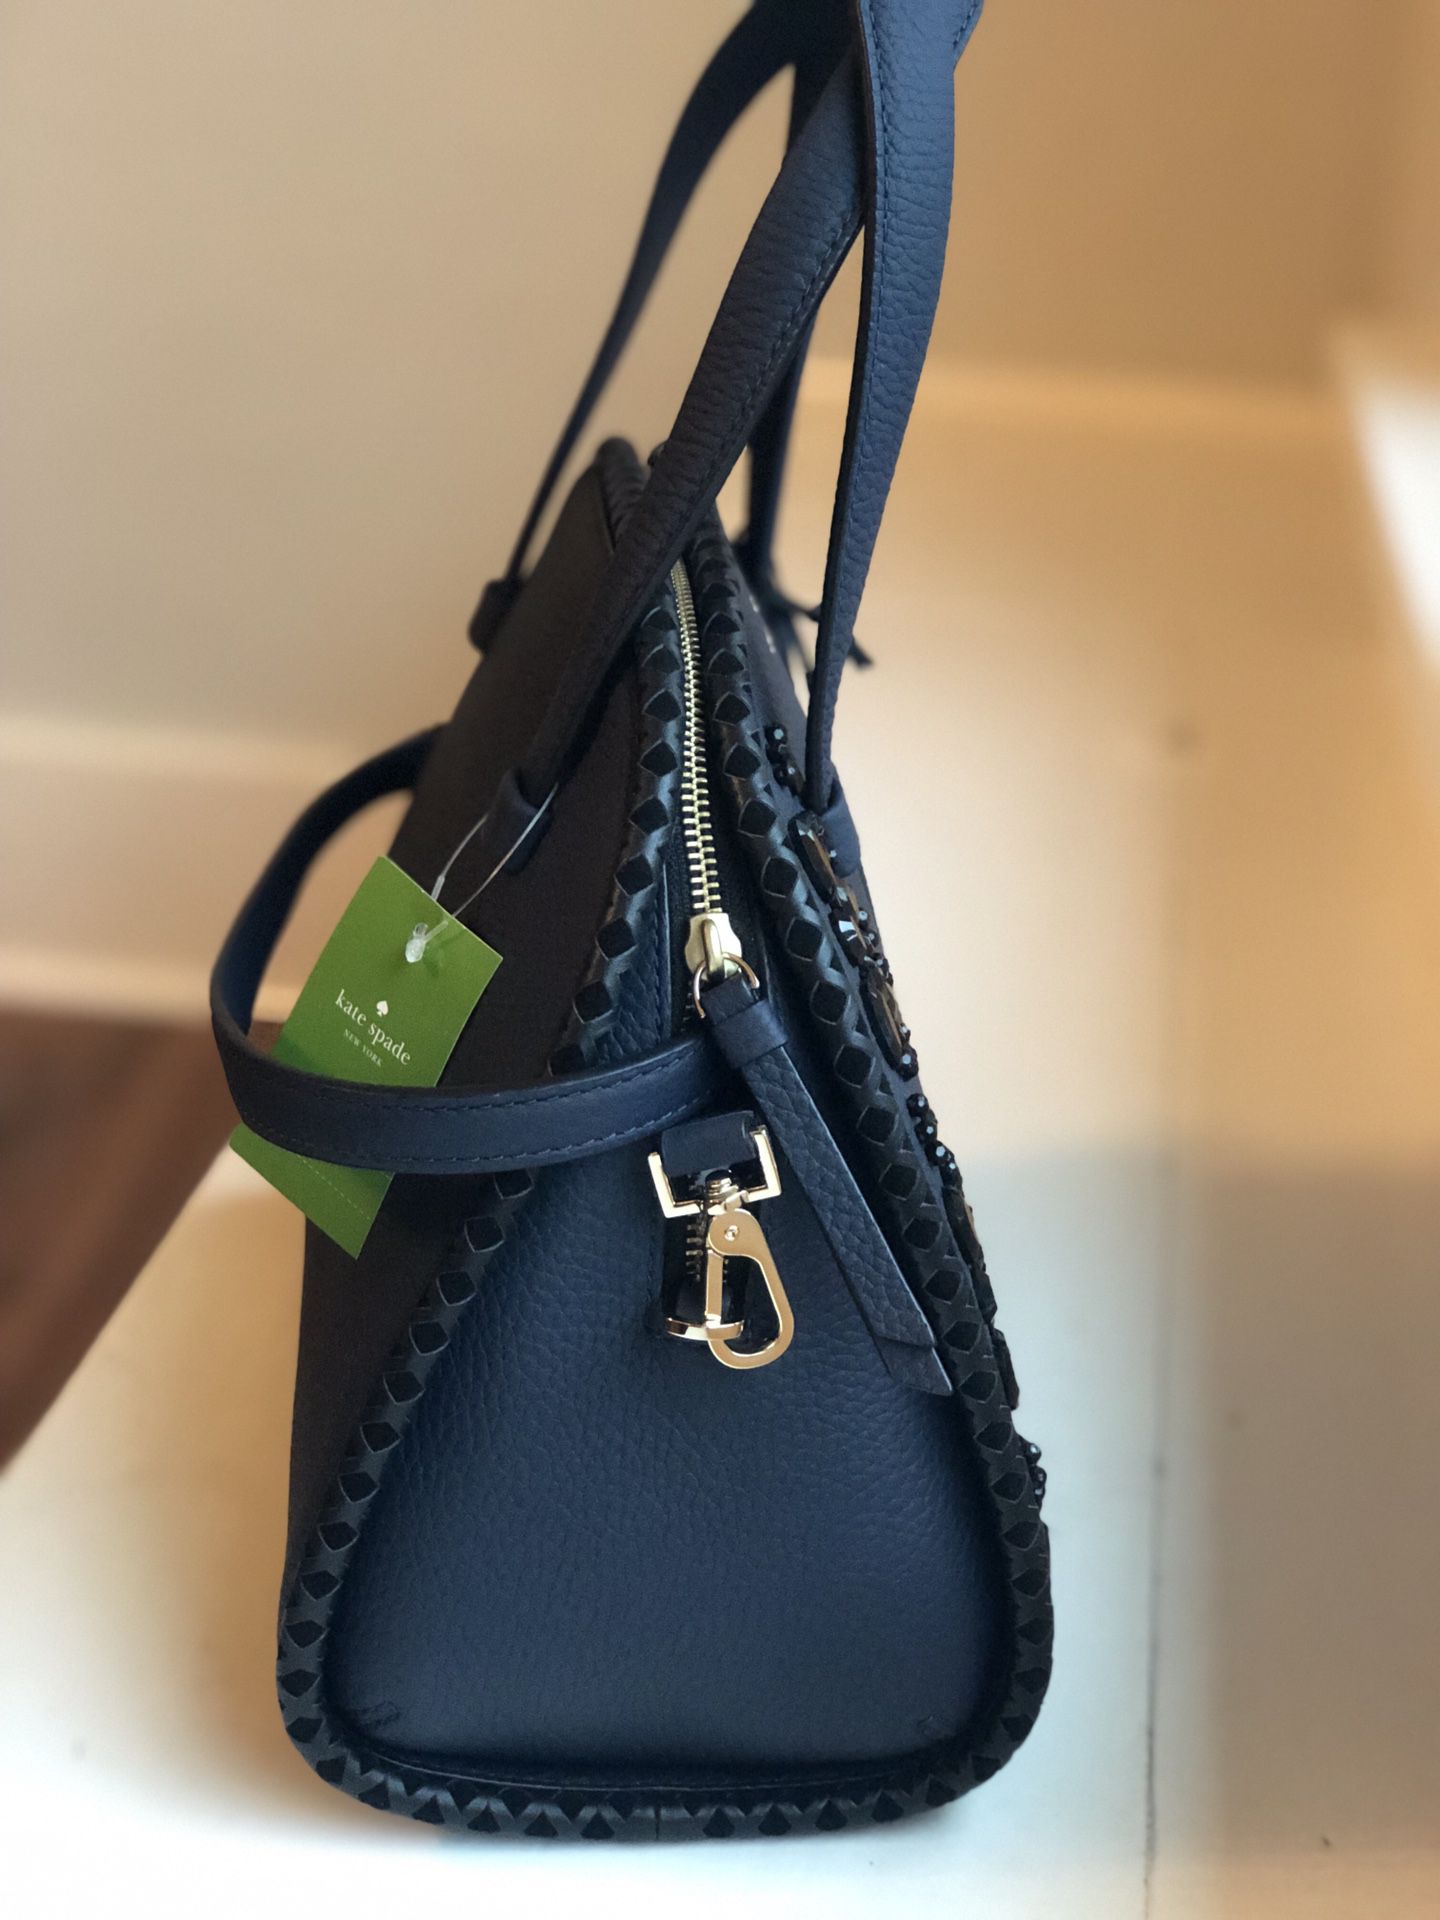 Kate Spade Anderson Way reiley embellished satchel navy blue !!BRAND NEW  WITH TAGS!! for Sale in Burien, WA - OfferUp